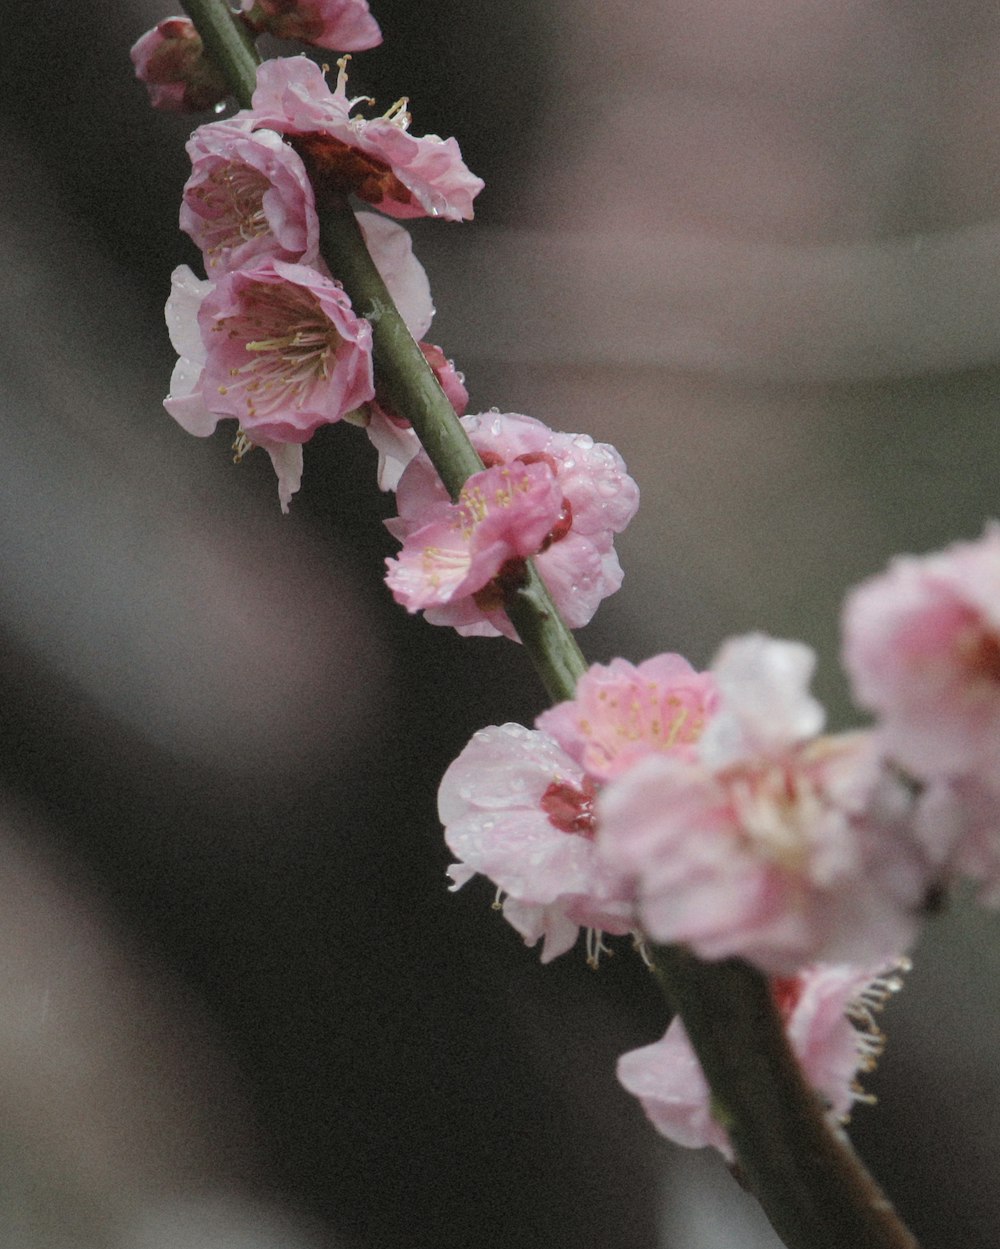 a close up of a branch with pink flowers